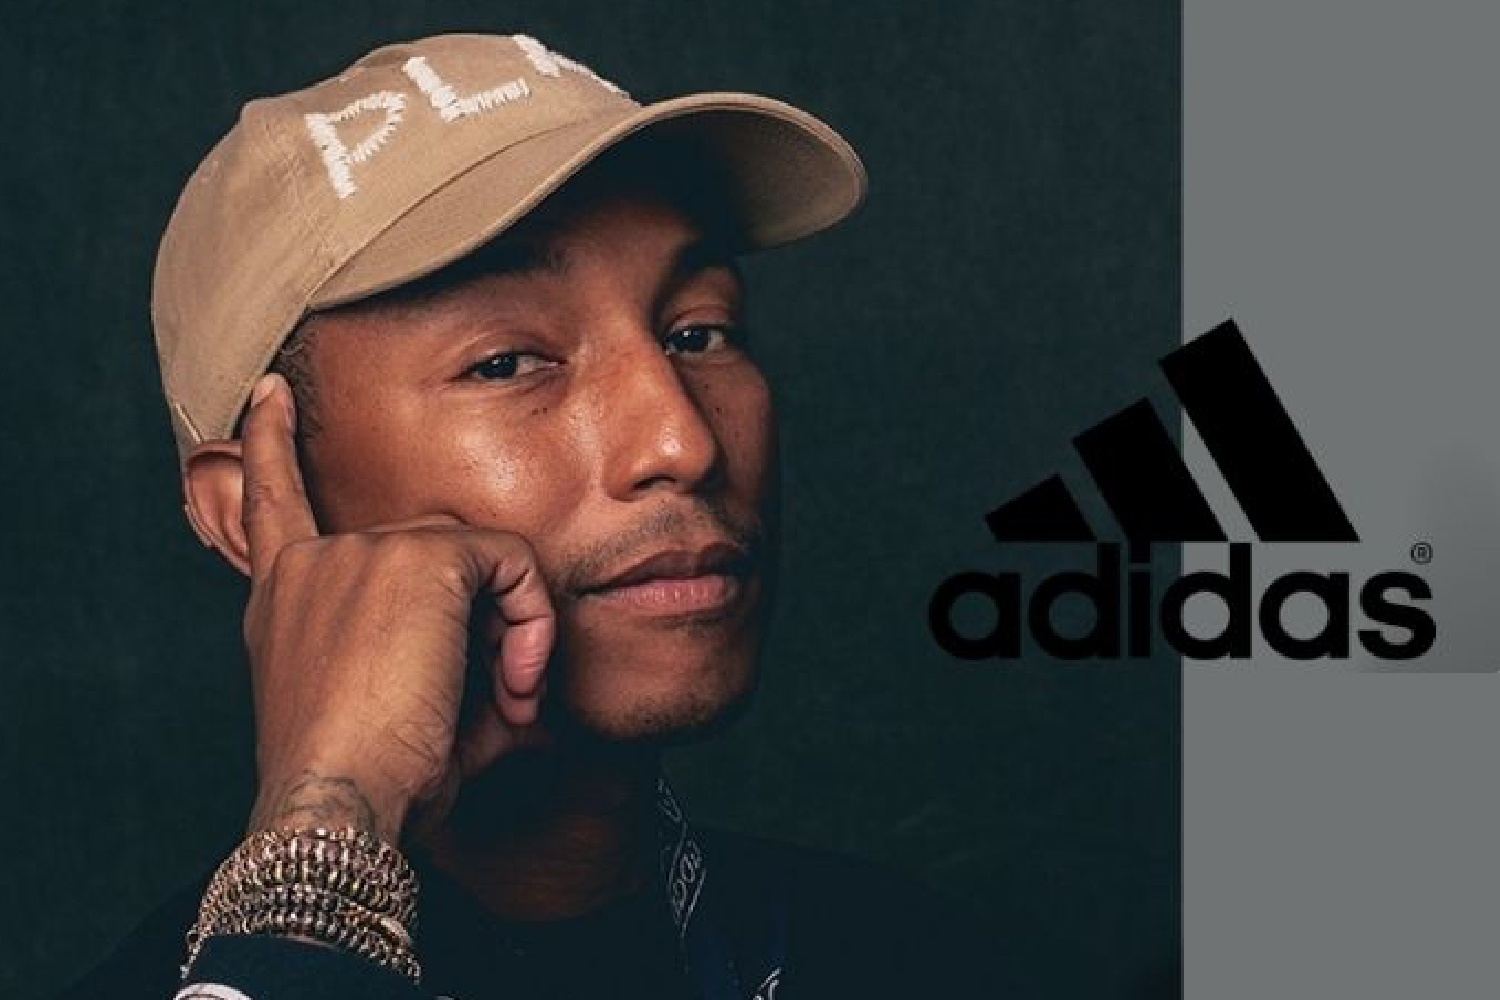 Pharrell Williams in the sneaker and street wear game